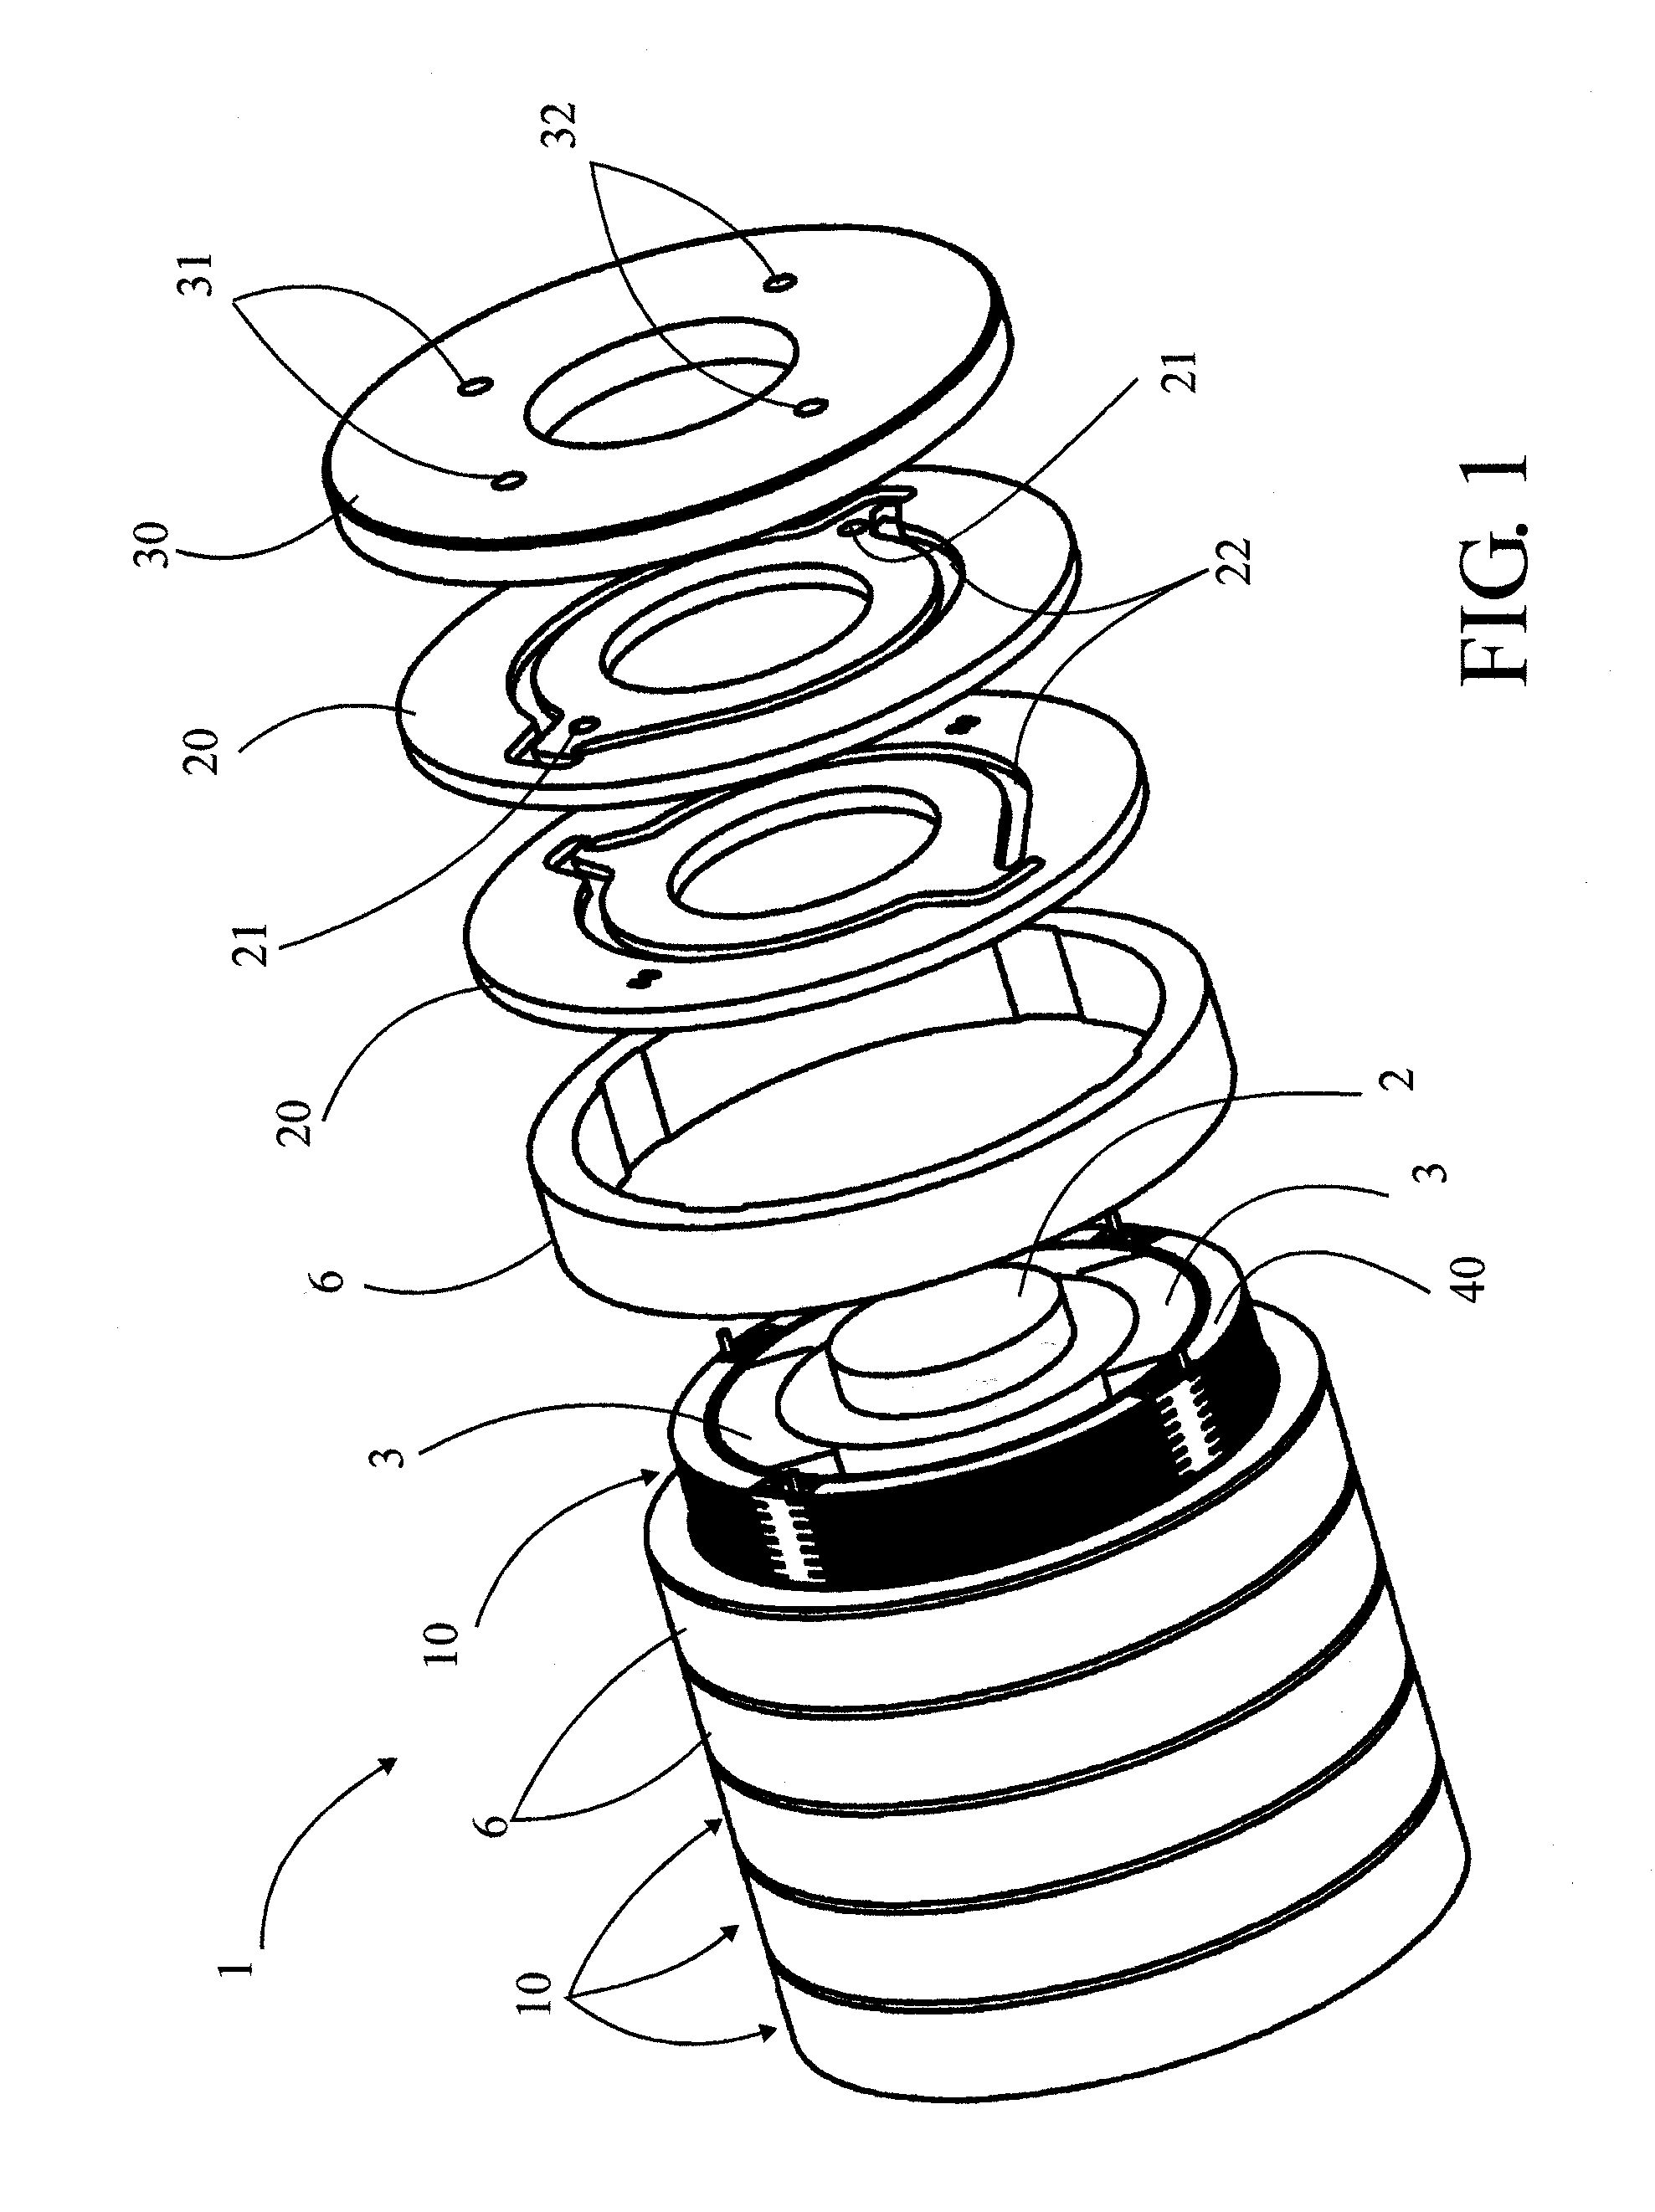 Magnetocaloric thermal generator having hot and cold circuits channeled between stacked thermal elements